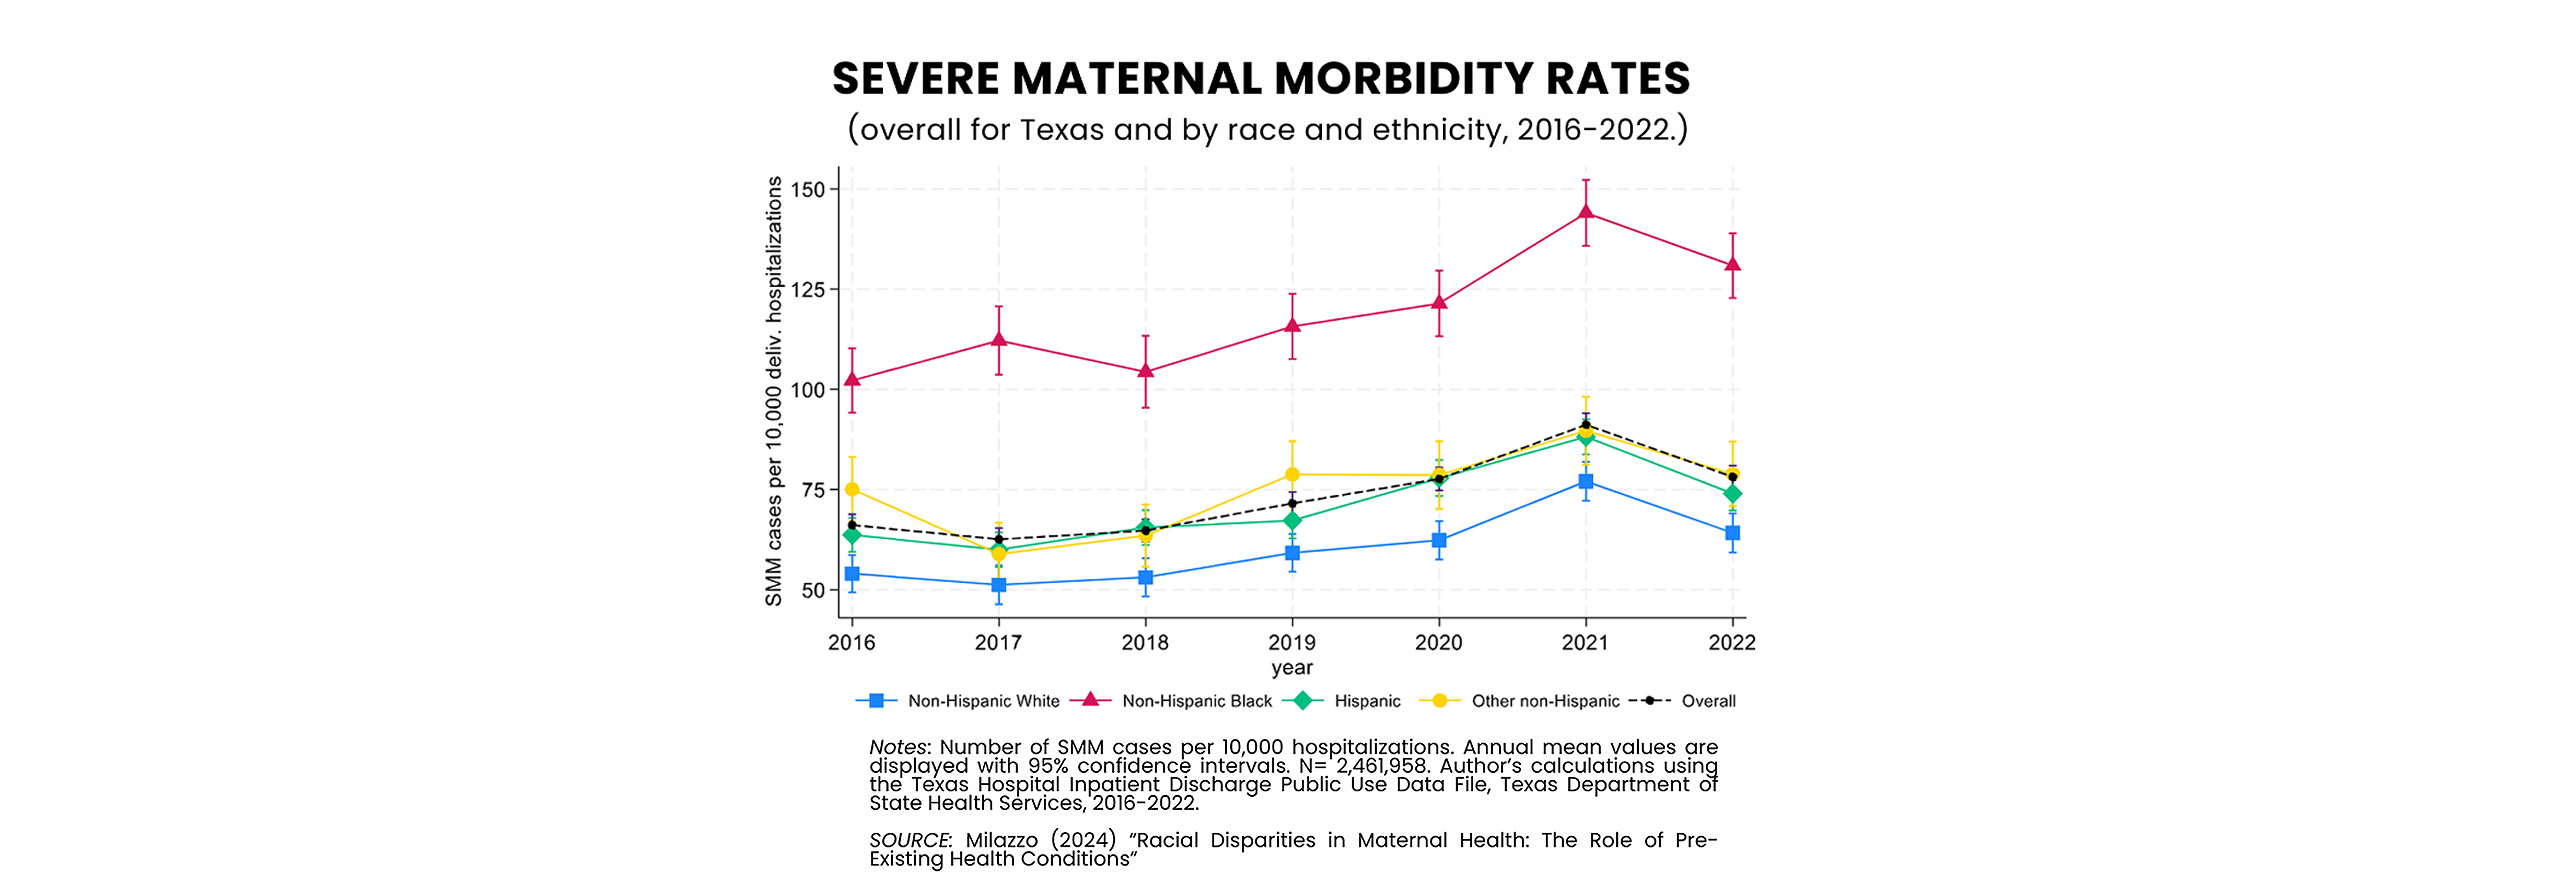 Racial Disparities in Maternal Health: The Role of Preexisting Health Conditions